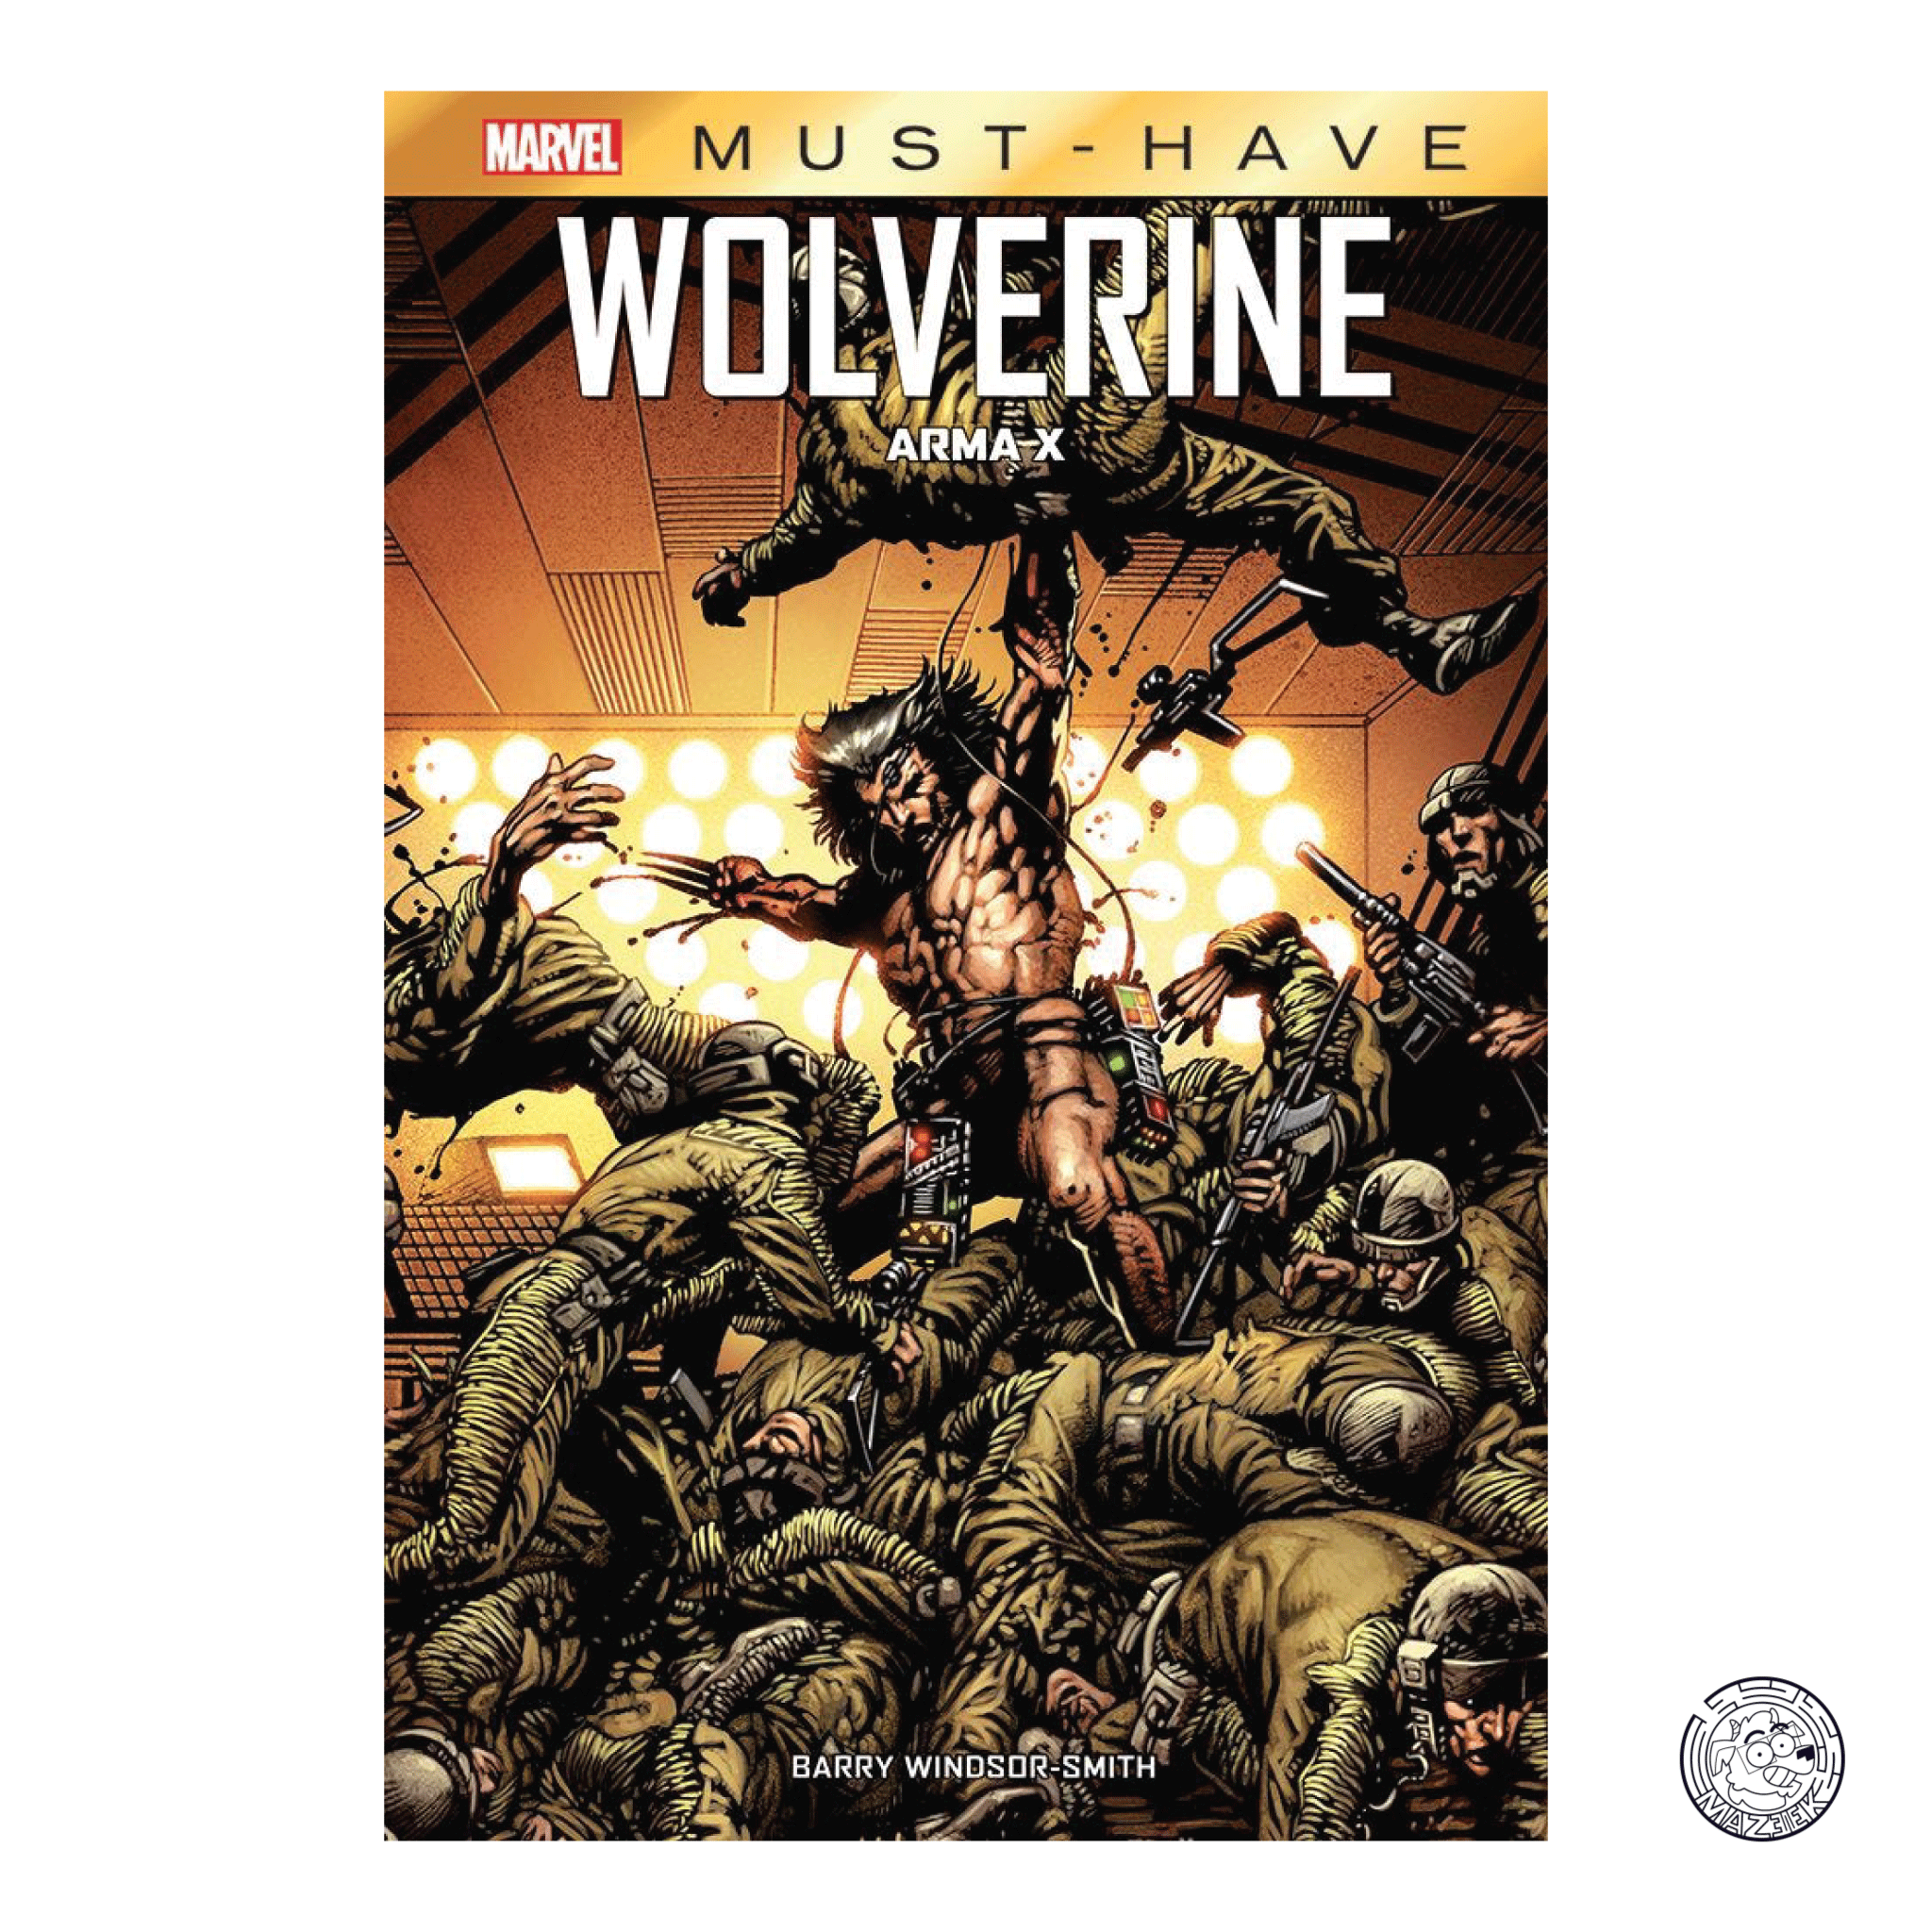 Marvel Must Have - Wolverine: Arma X